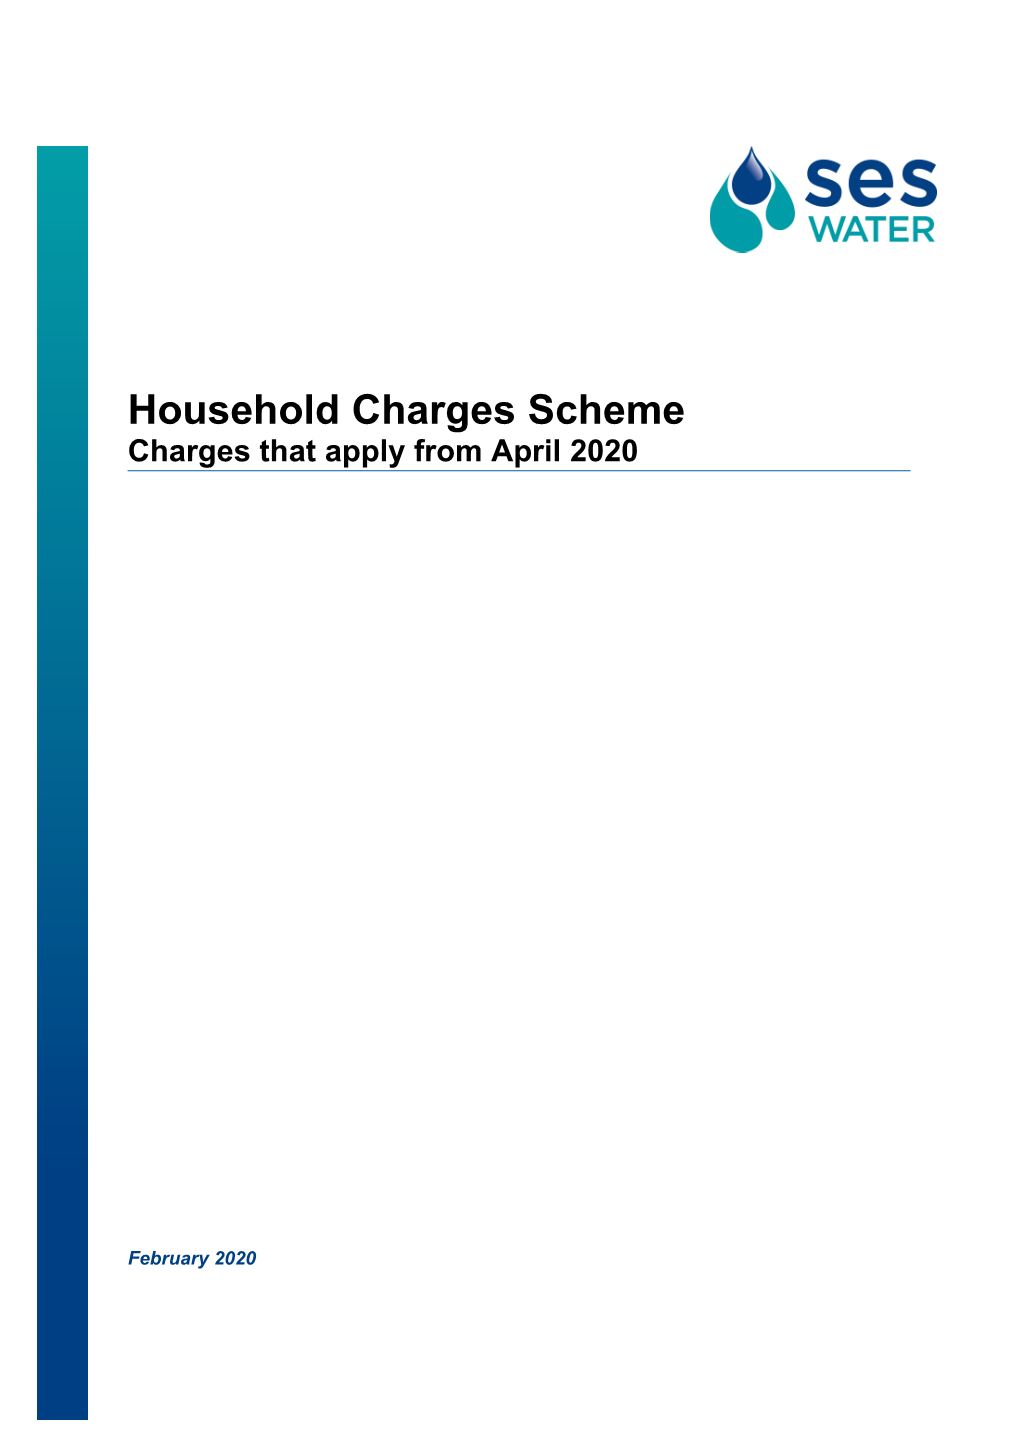 Household Charges Scheme Charges That Apply from April 2020